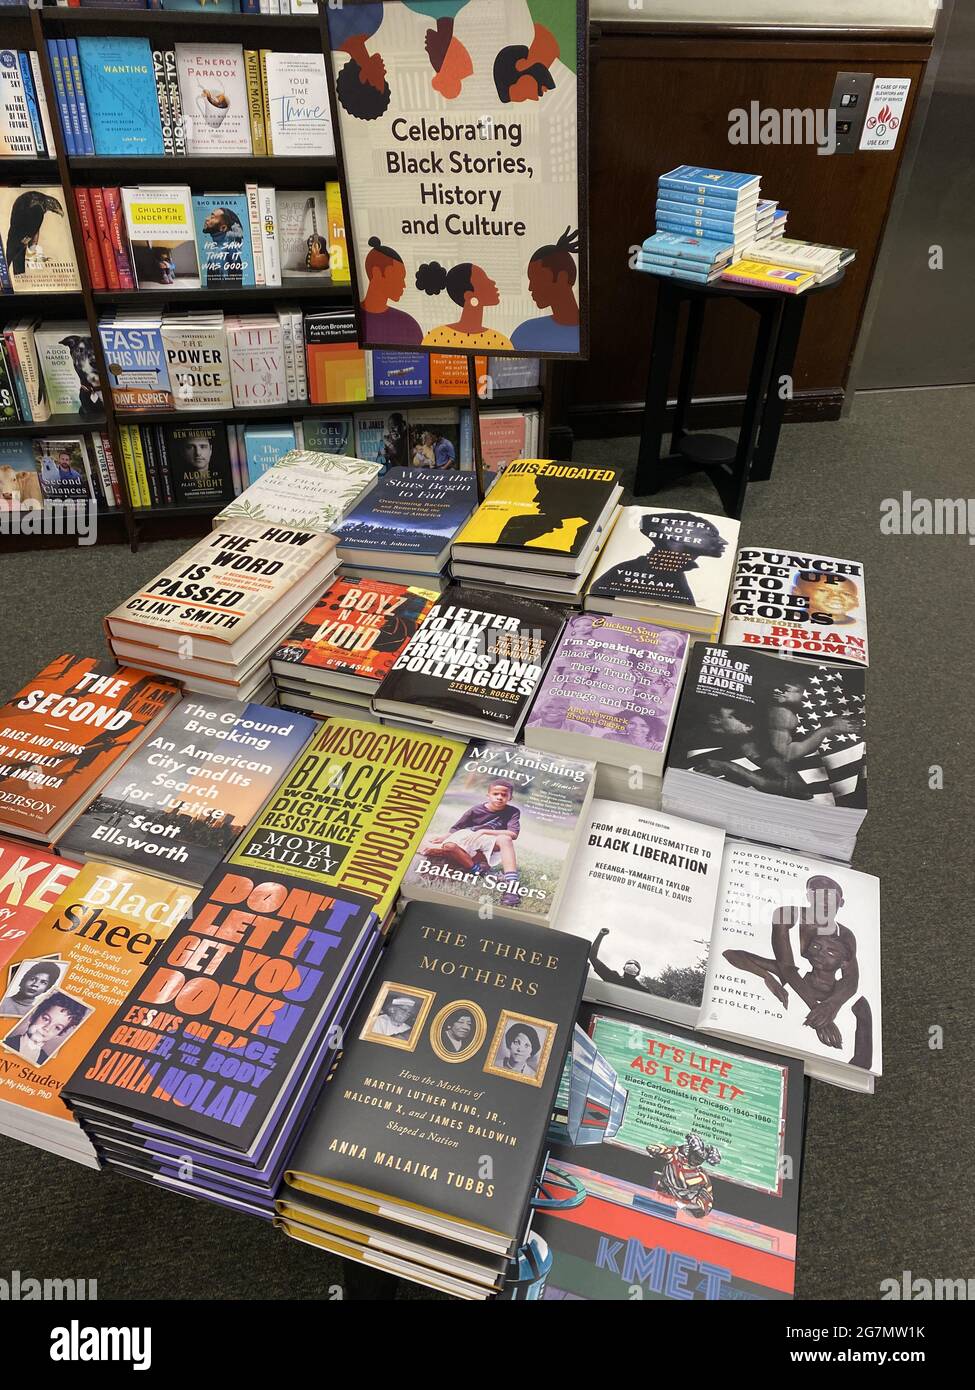 Display of books for sale celebrating Black history and culture around the Juneteenth national holiday in the United States. Bookstore, Brooklyn, NY. Stock Photo